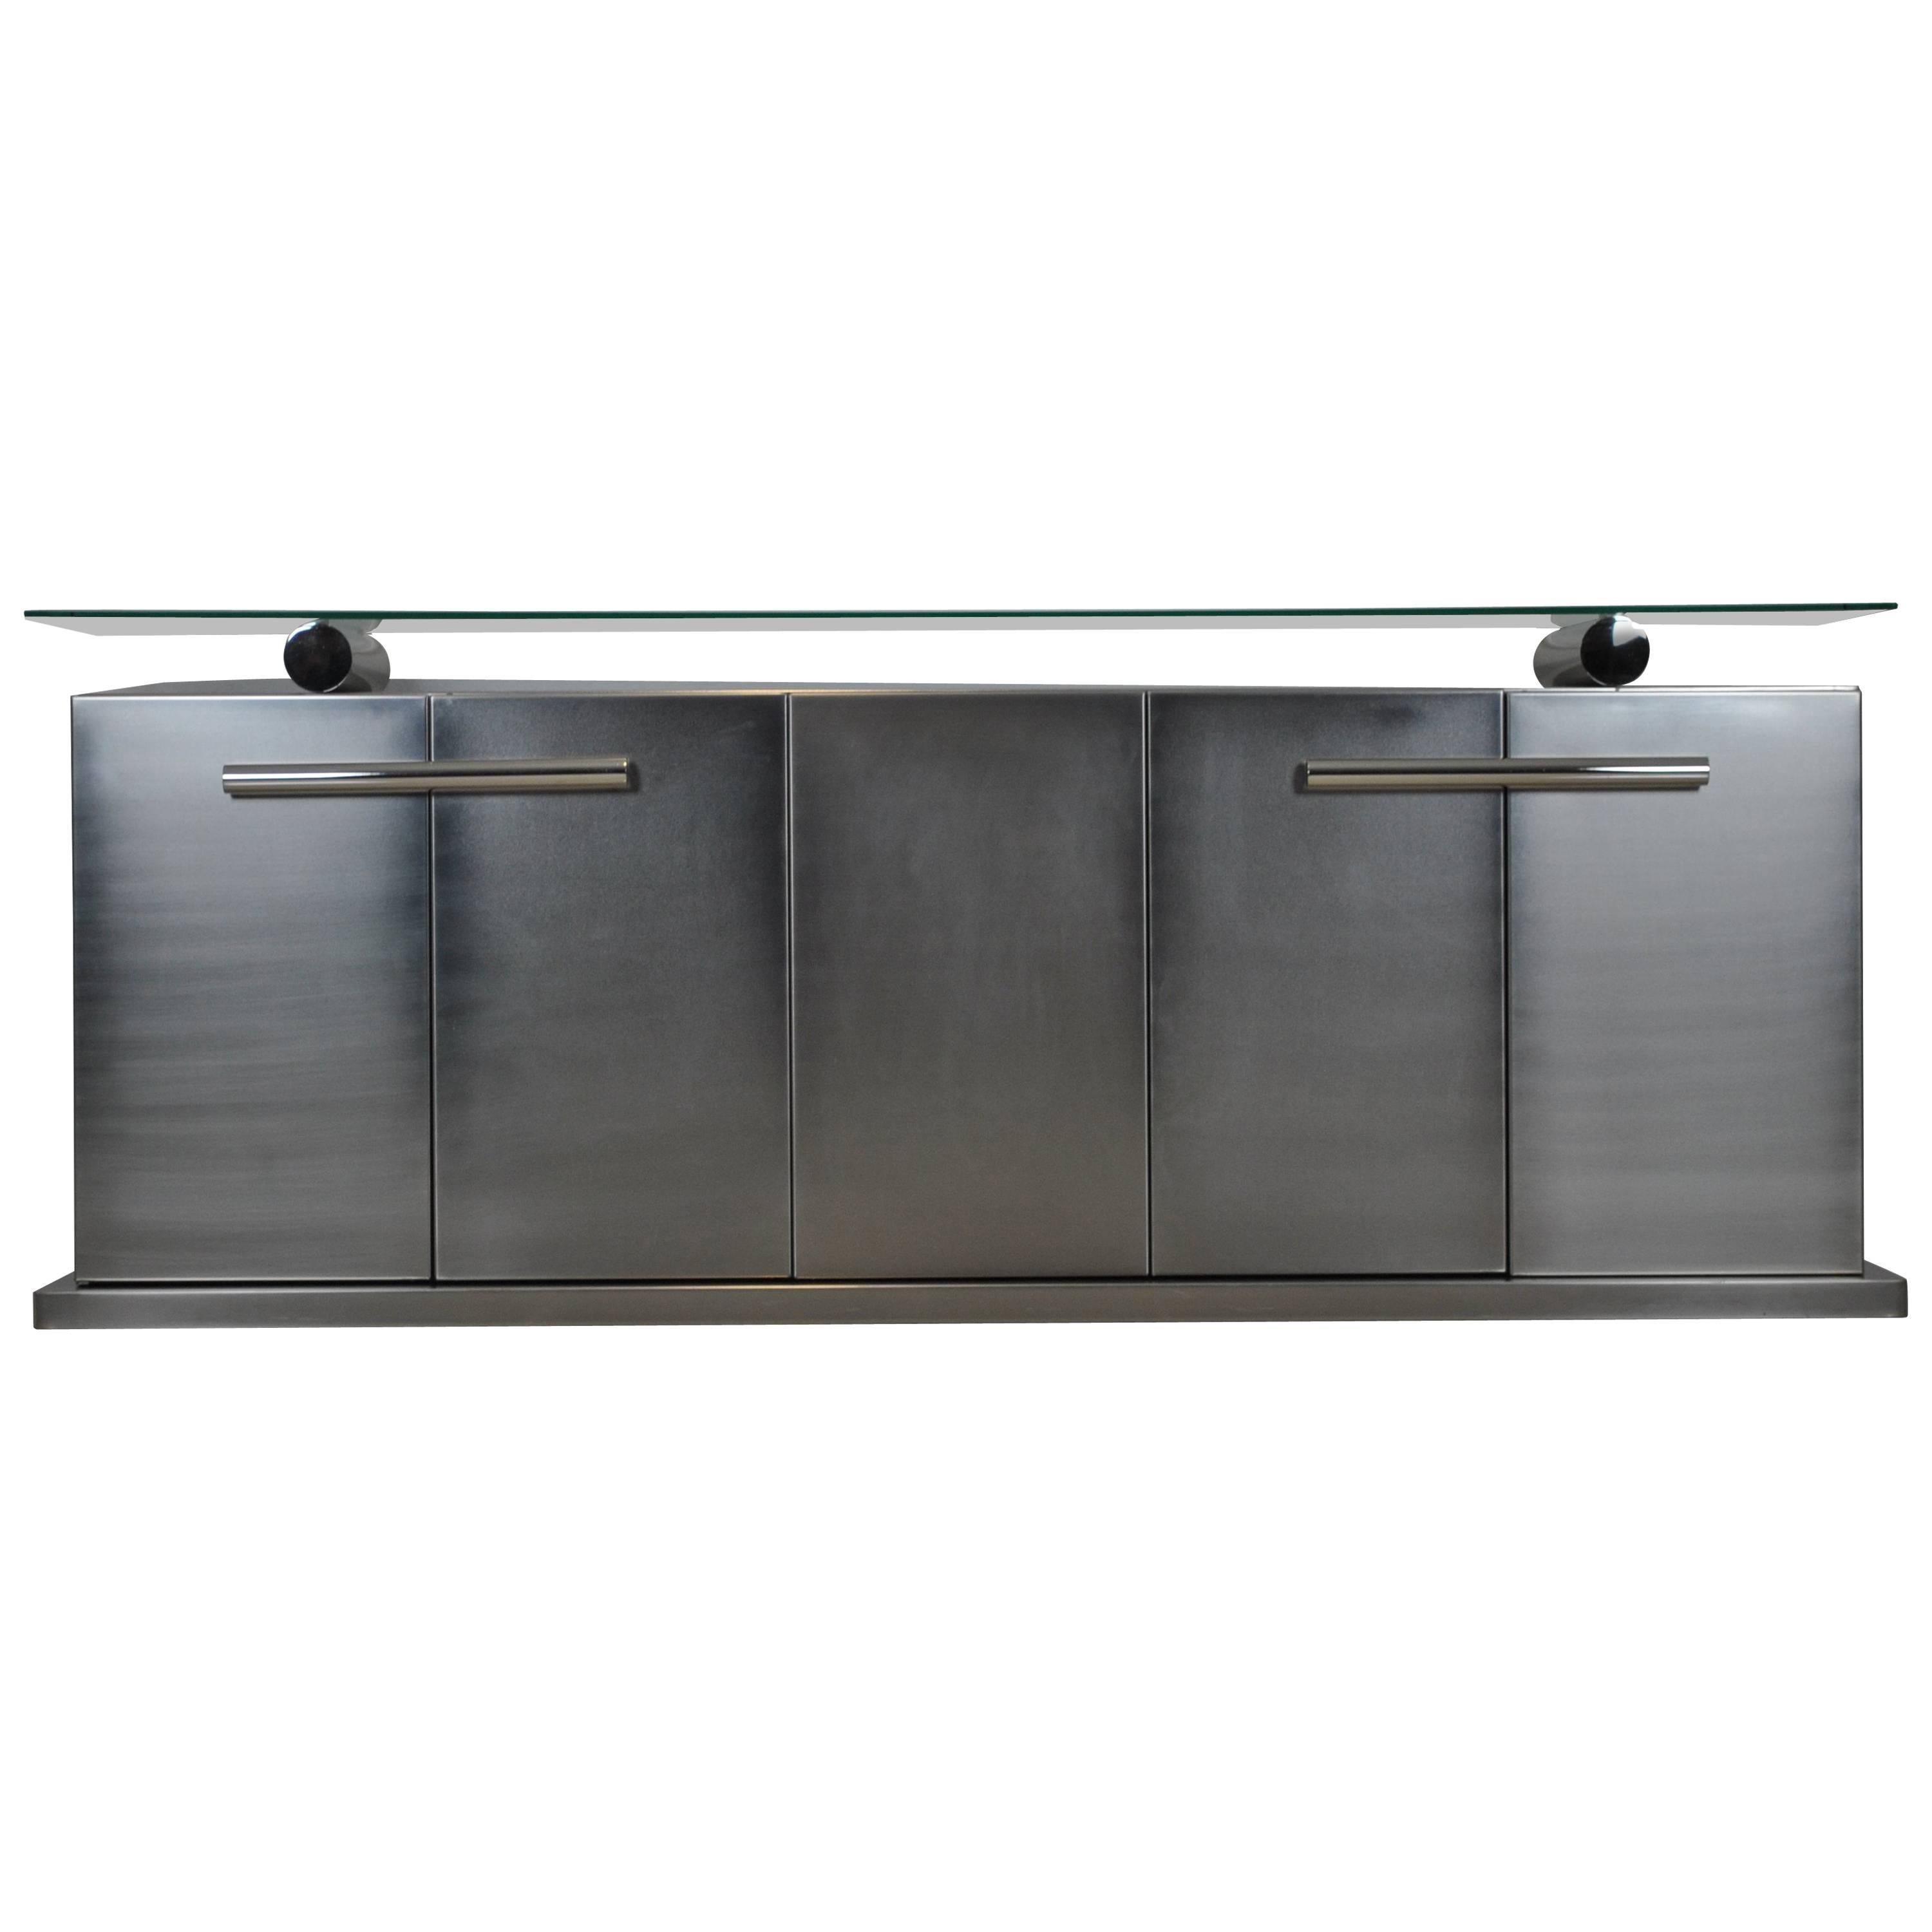 Spectacular Stainless Steel Sideboard by Koenraad Dewulf for BelgoChrom For Sale